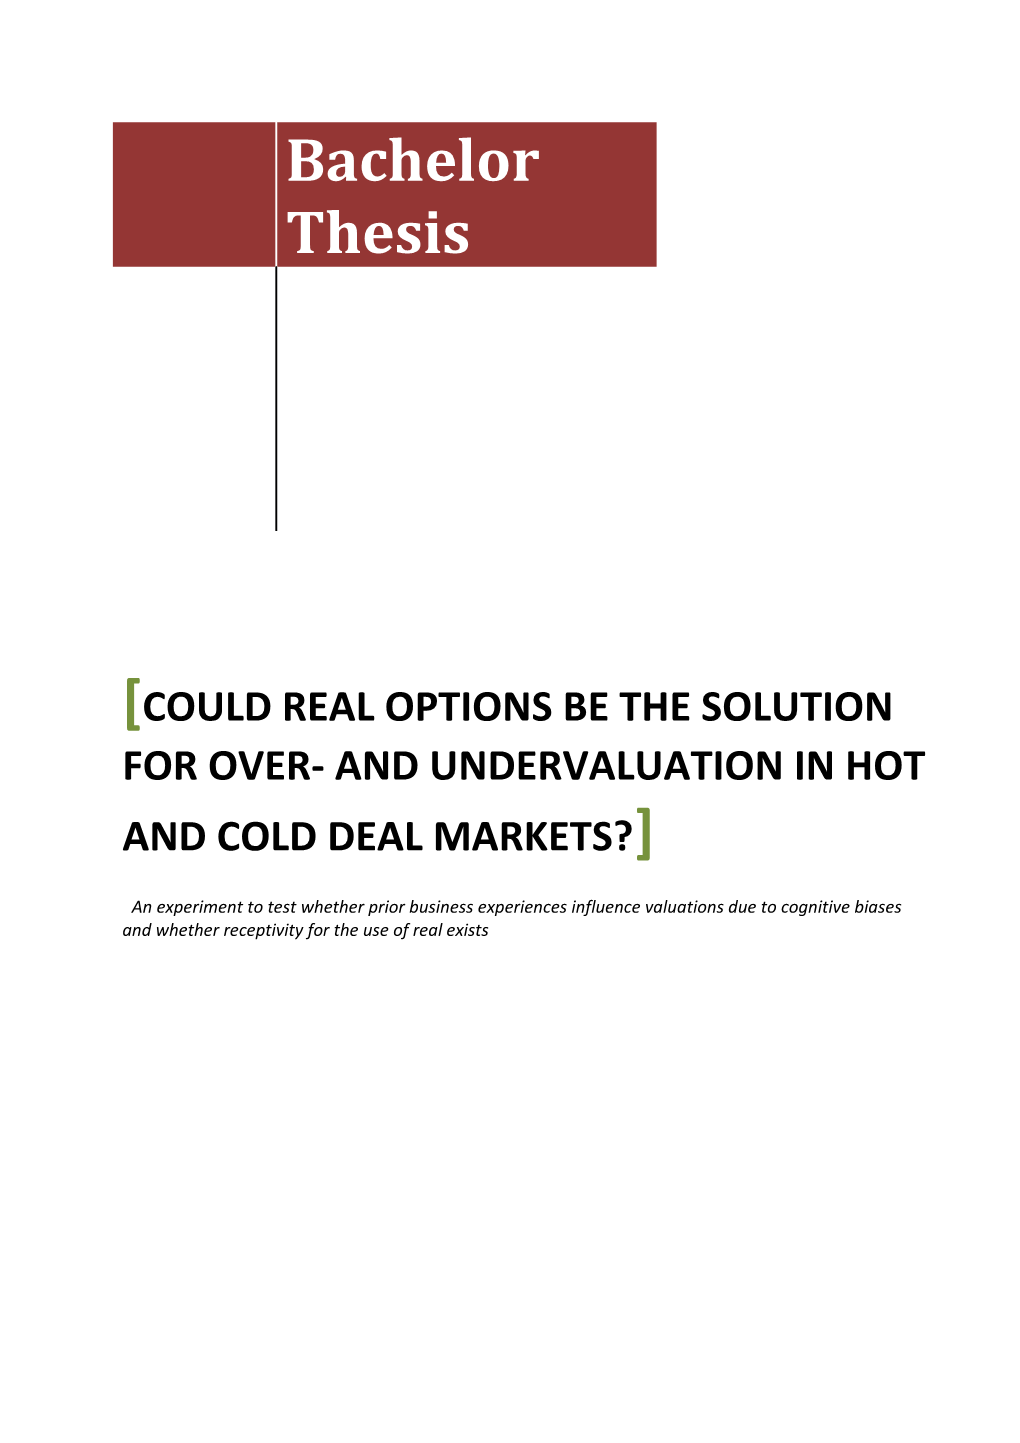 Could Real Options Be the Solution for Over- and Undervaluation in Hot and Cold Deal Markets?